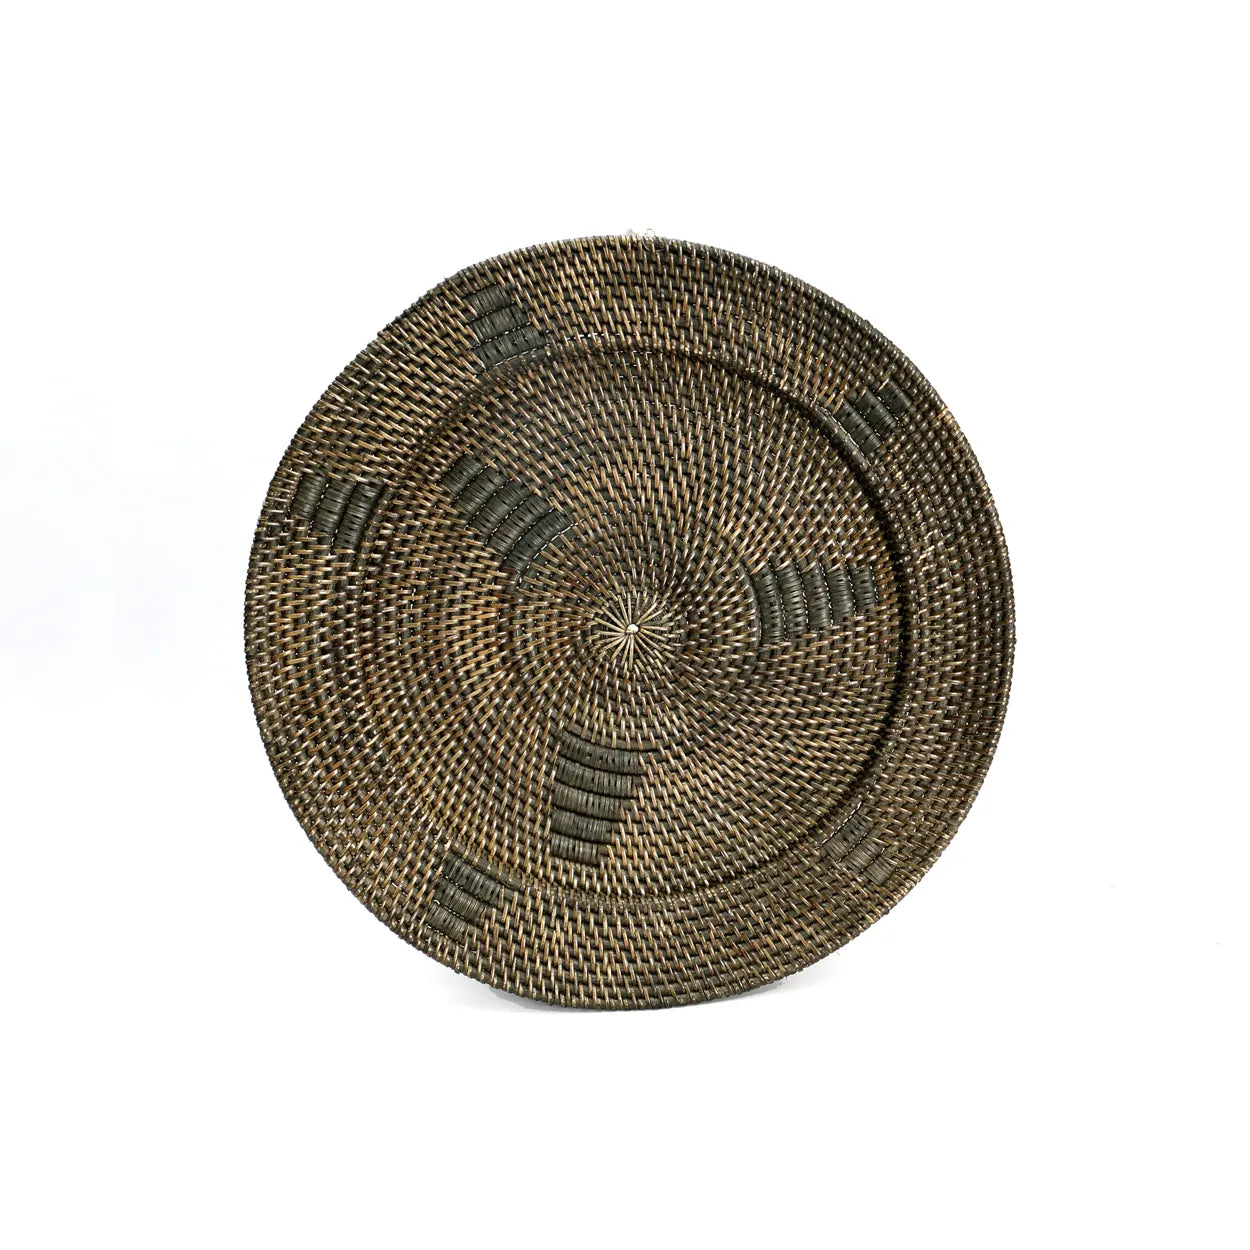 Cazorla Graphic Weave - Handwoven Wall Plate